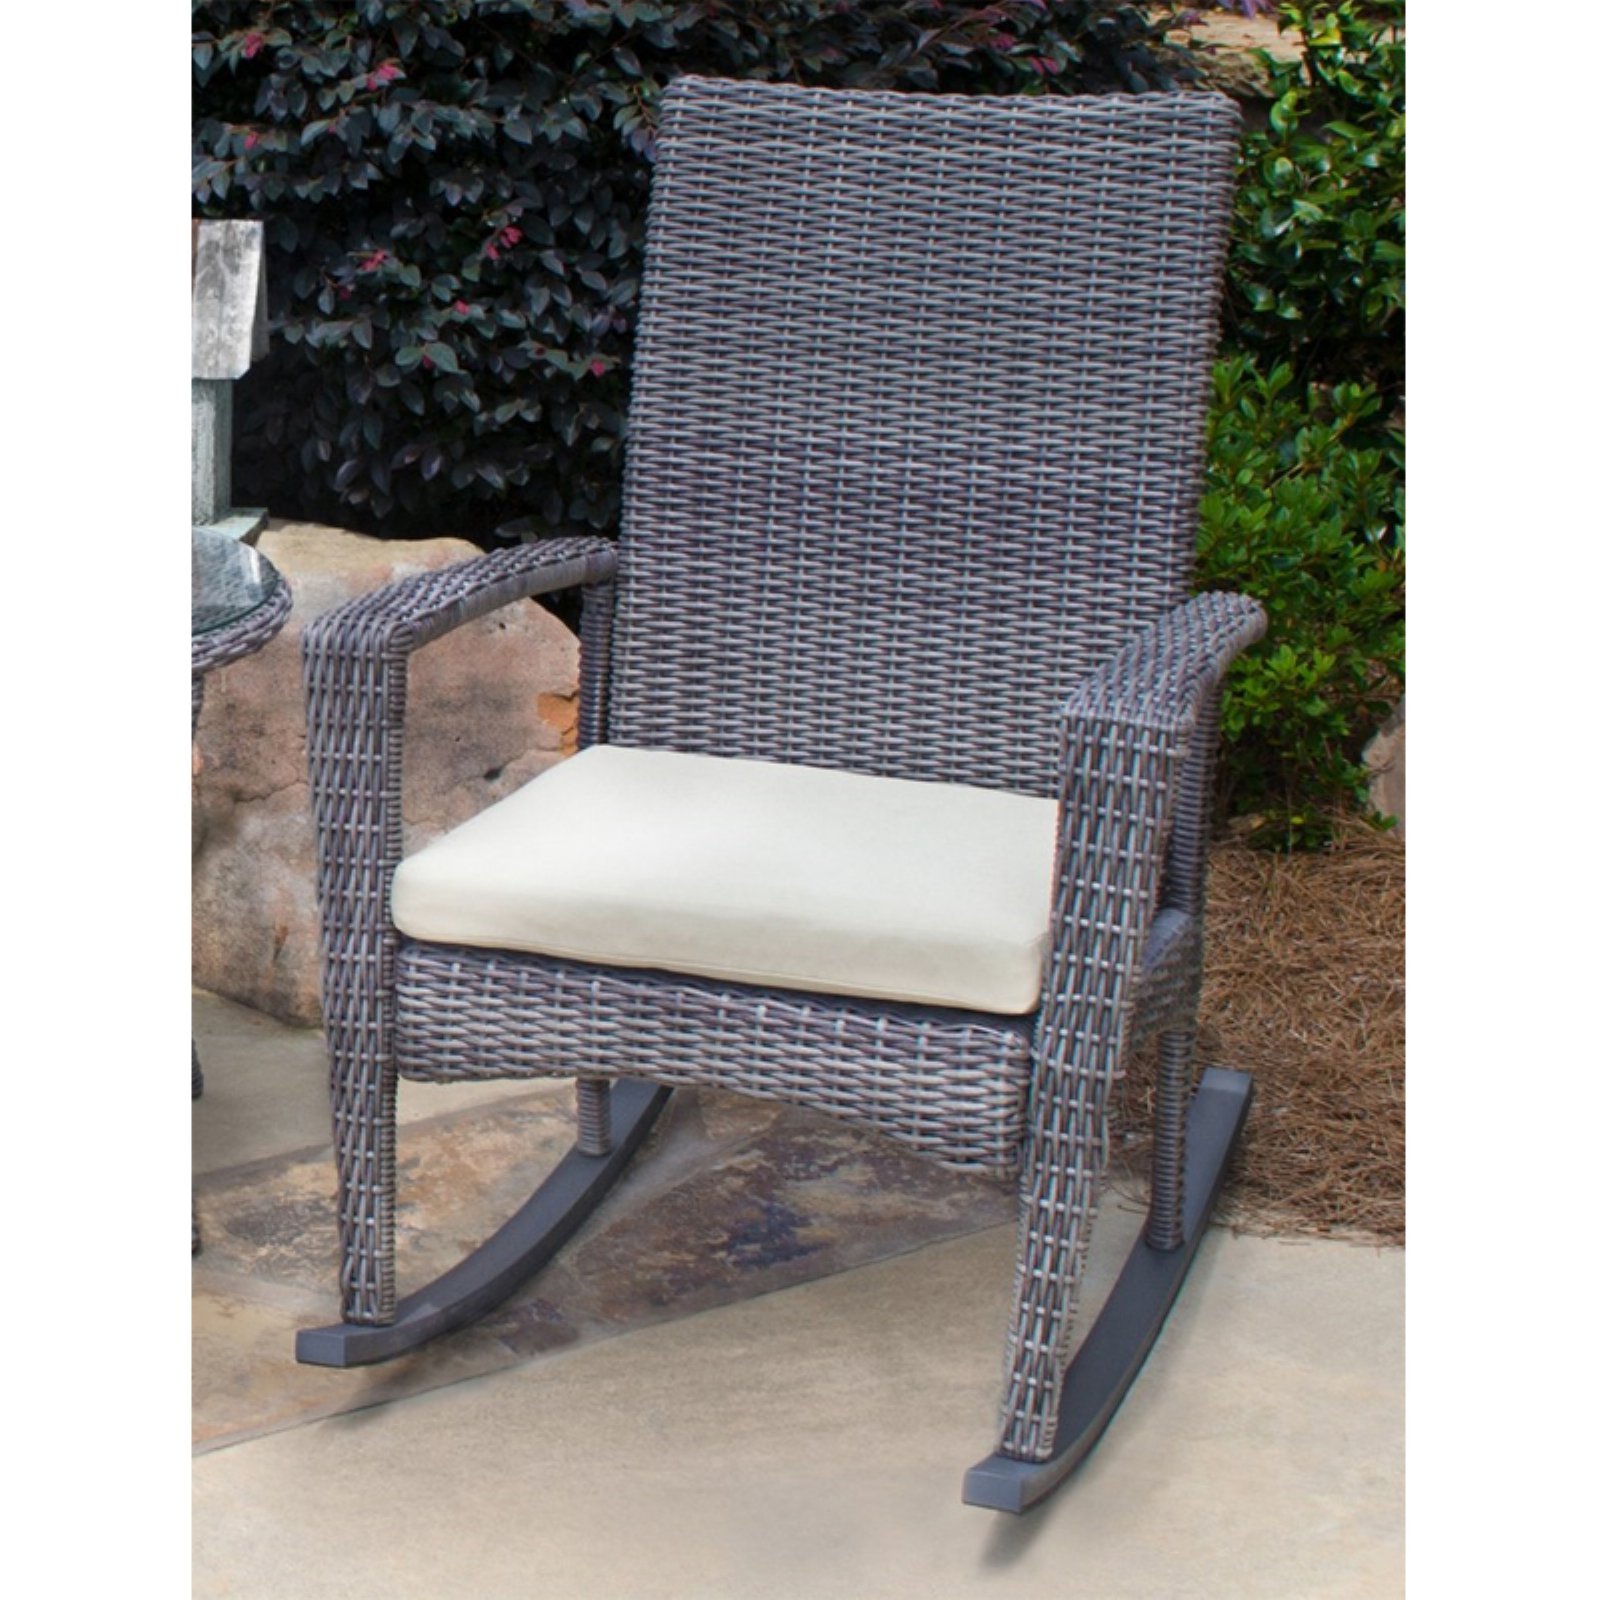 Tortuga Outdoor Bayview Wicker Rocking Chair with Cushion - image 2 of 11